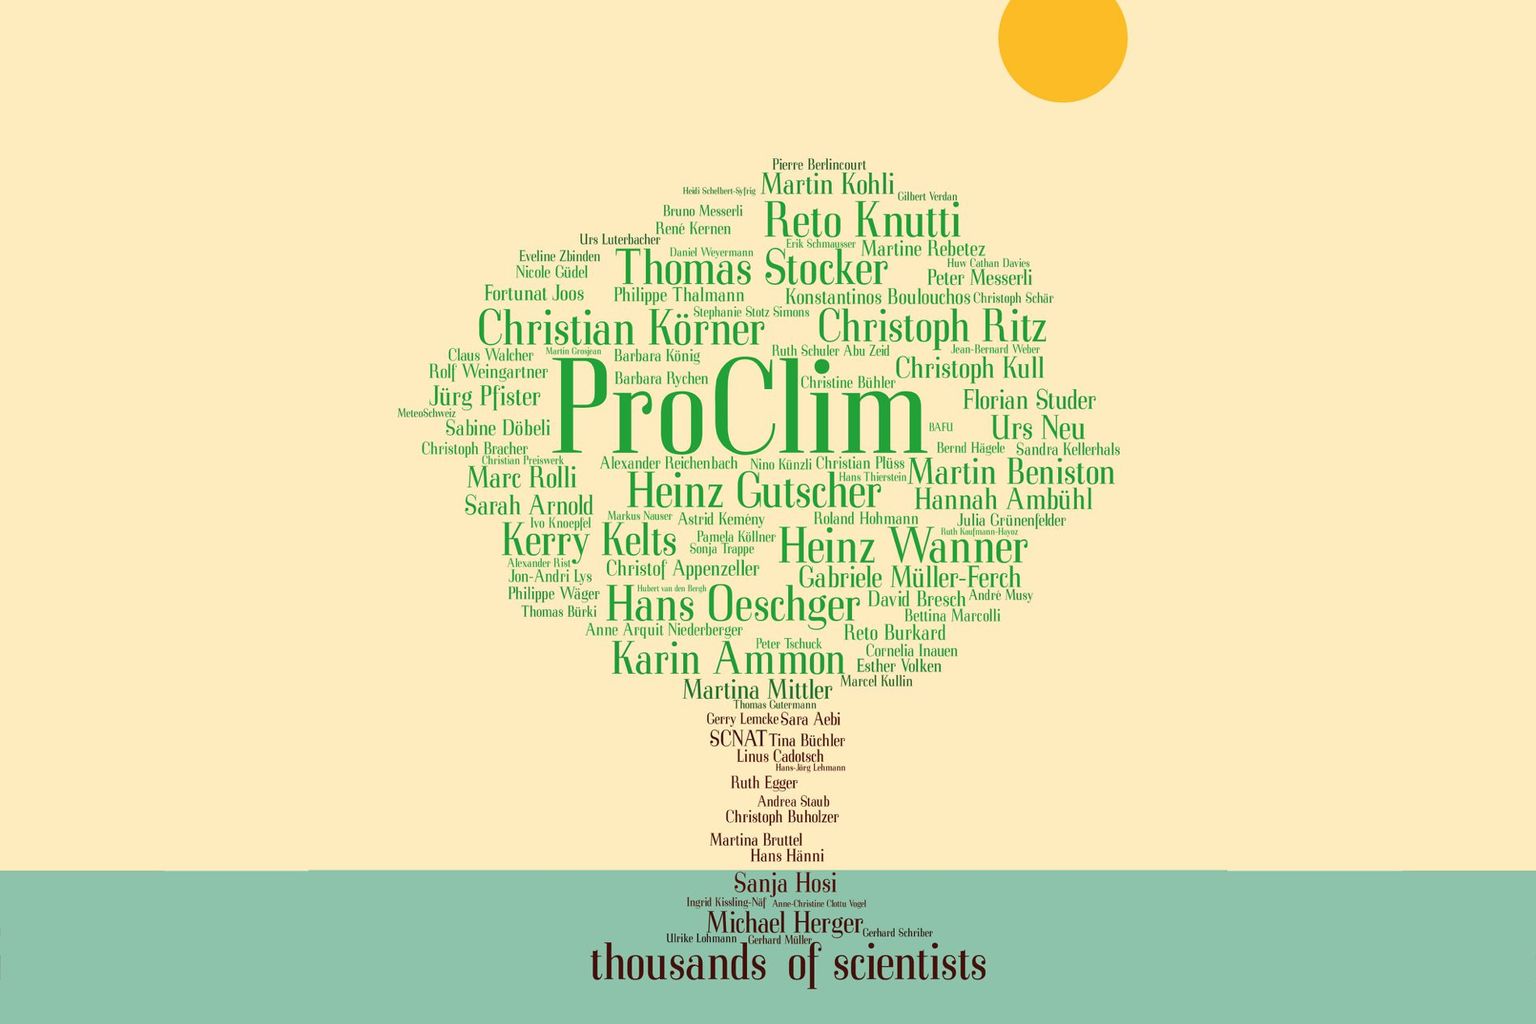 The ProClim tree has been growing with the help of thousands of committed people.